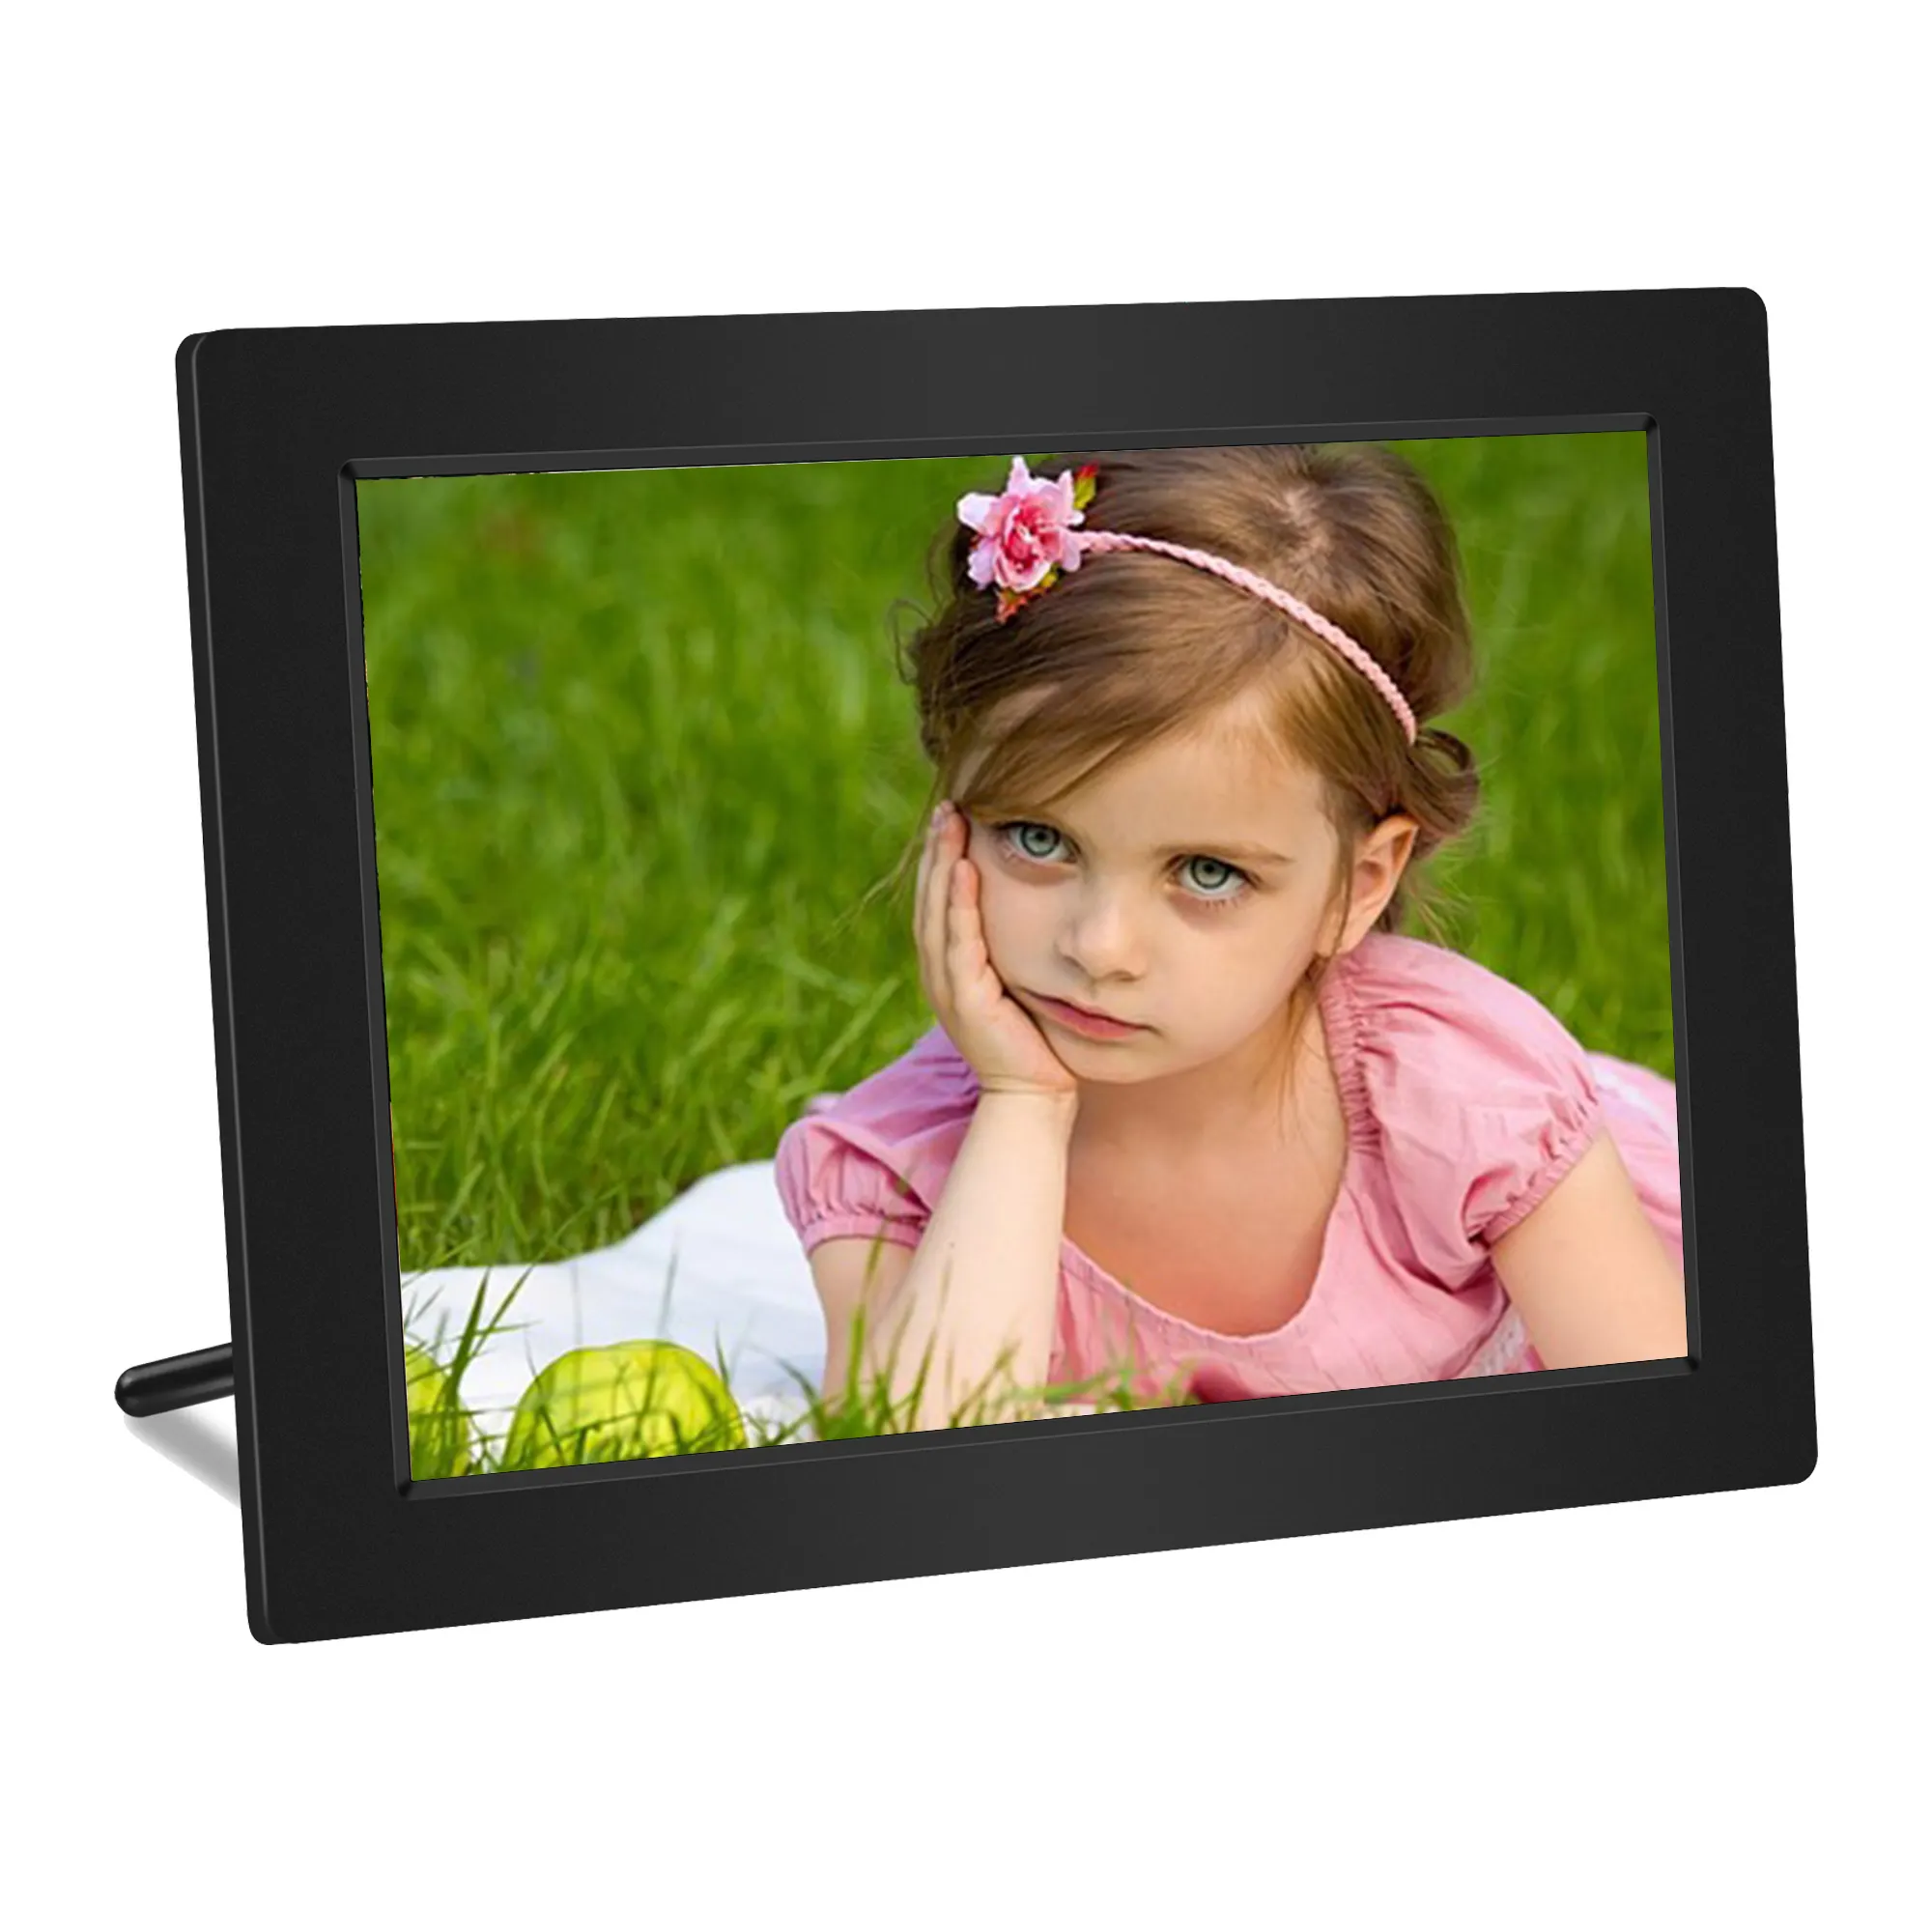 10.1'' Good Digital Frame for Gifting Send Photos from Your Phone Quick Easy Setup in App 32GB WiFi Digital Picture Frame